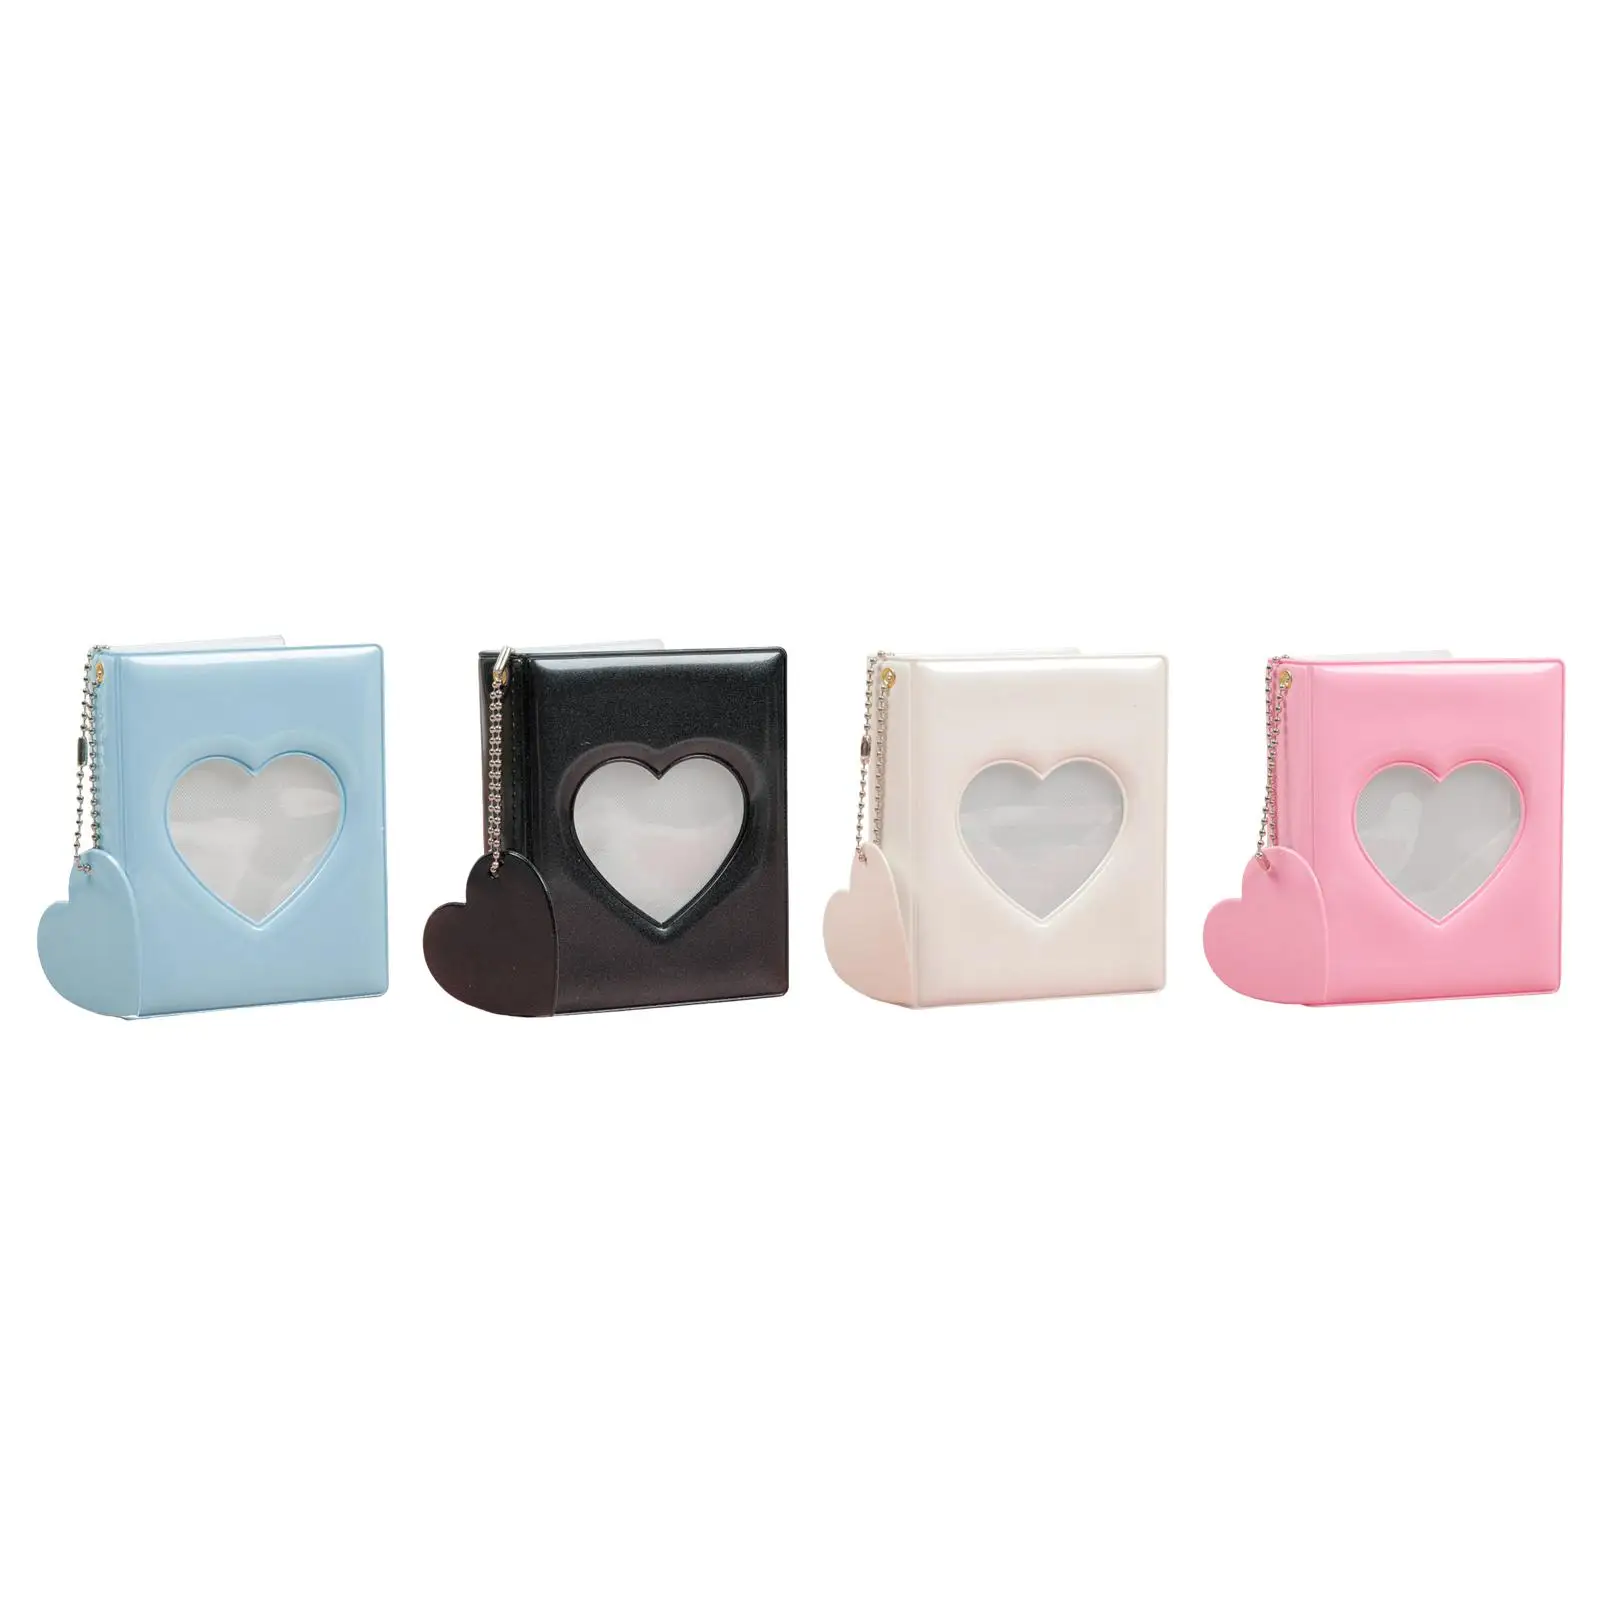 Cute 3 inch Photo Card Holder Heart Love Hollow Photocard Binder Mini Album for Instant Camera Business Card Film Ticket